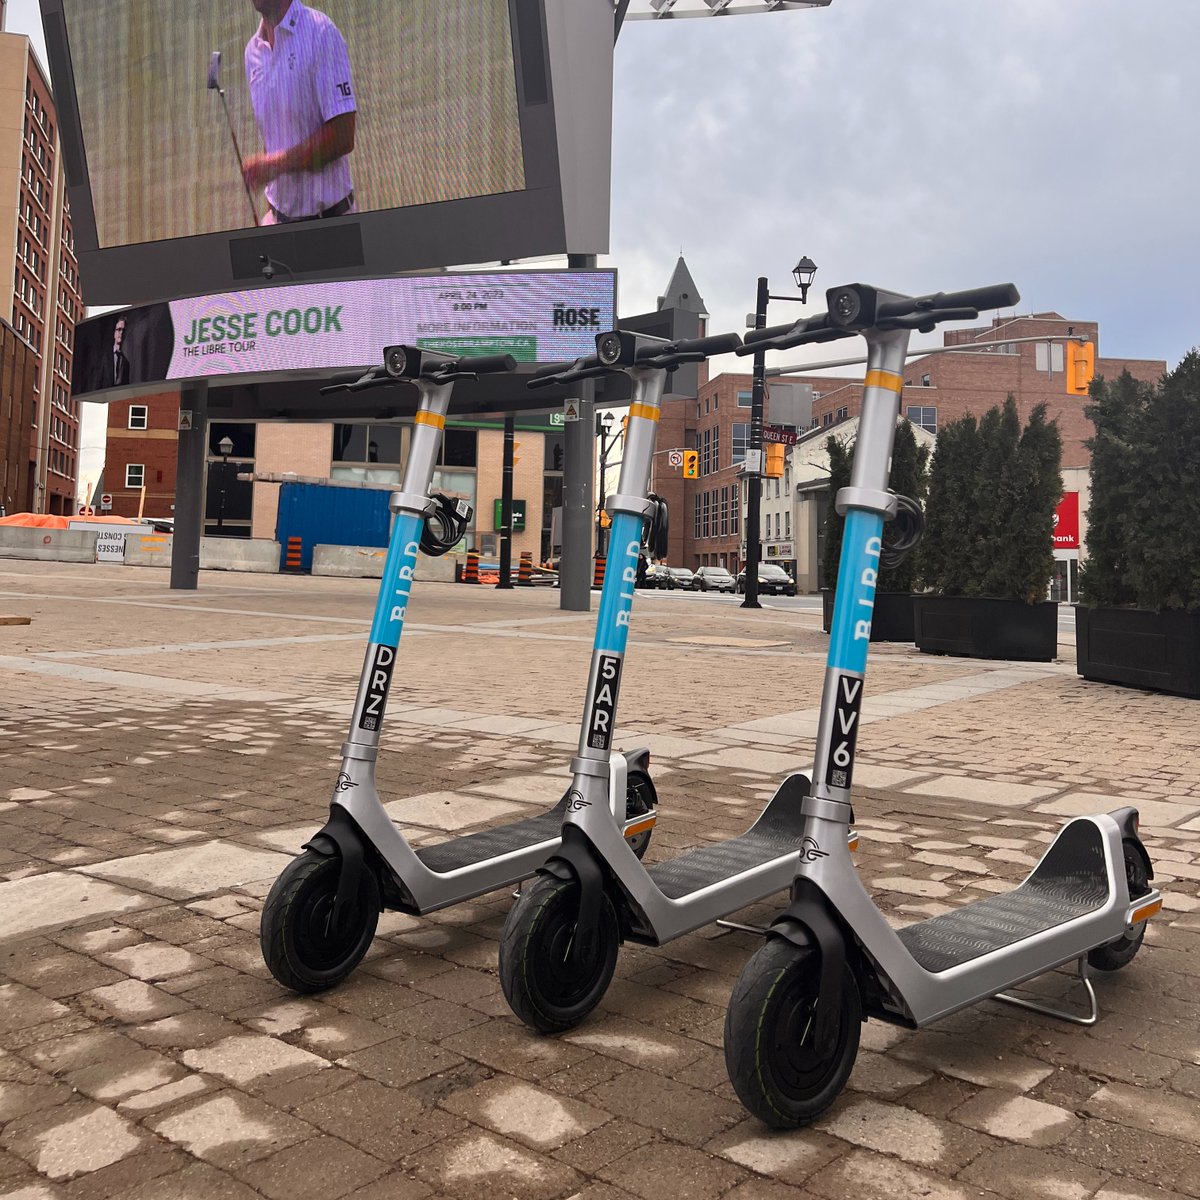 This morning, we joined @CityBrampton for a successful launch event welcoming e-scooters to the City! We’re excited to connect residents to communities, businesses, and services throughout the downtown core and surrounding neighbourhoods in #Brampton. Enjoy the ride 🛴